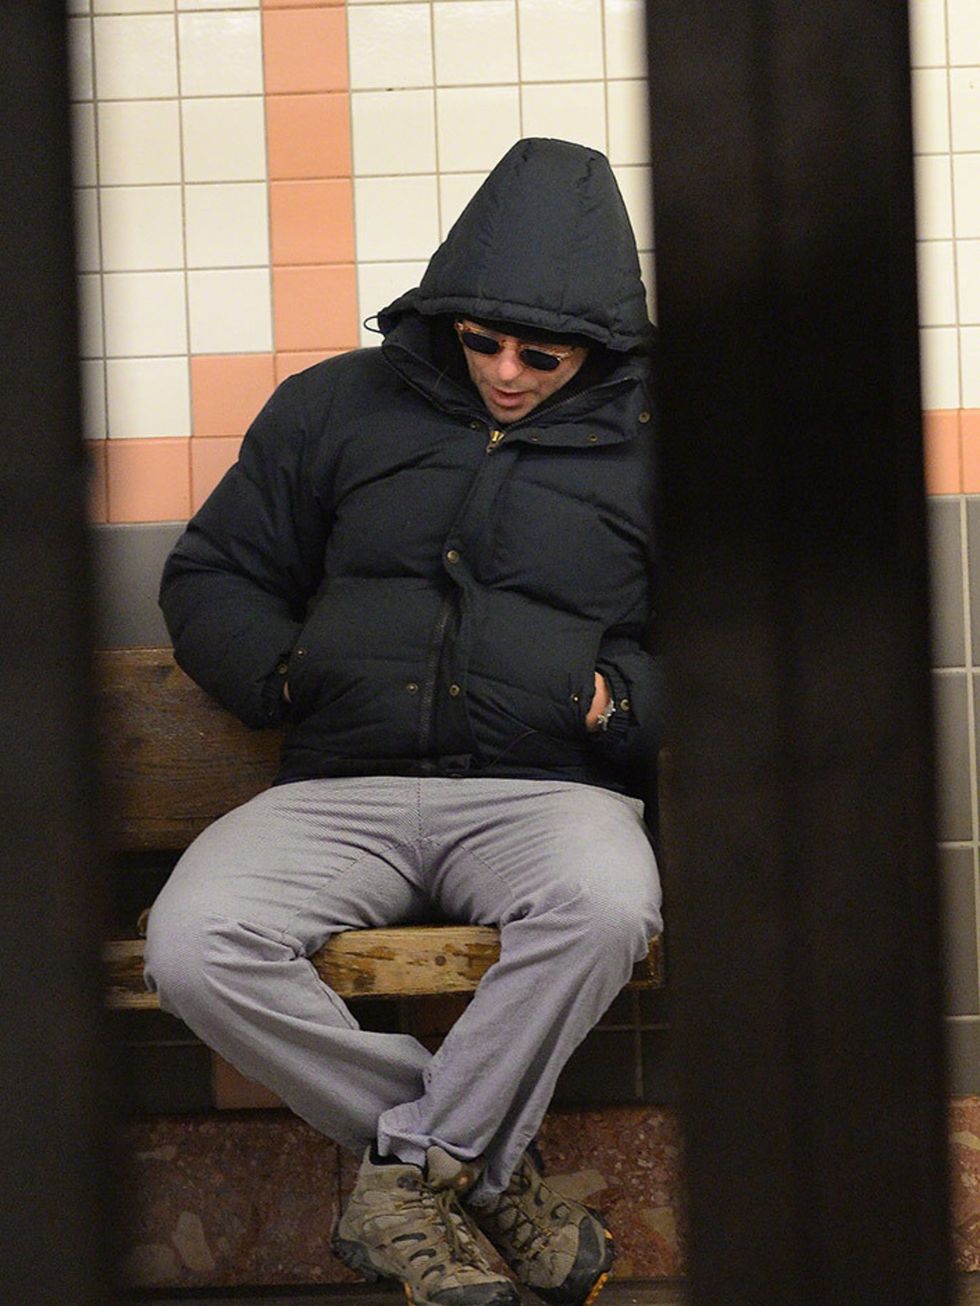 <p>BRADLEY COOPER</p>

<p>Spotted: Bradley 'resting' on the subway platform in NYC wearing Hollywood's favourite off-duty winter uniform: a practical puffa jacket, sunglasses and norm-to-the-core trousers.</p>